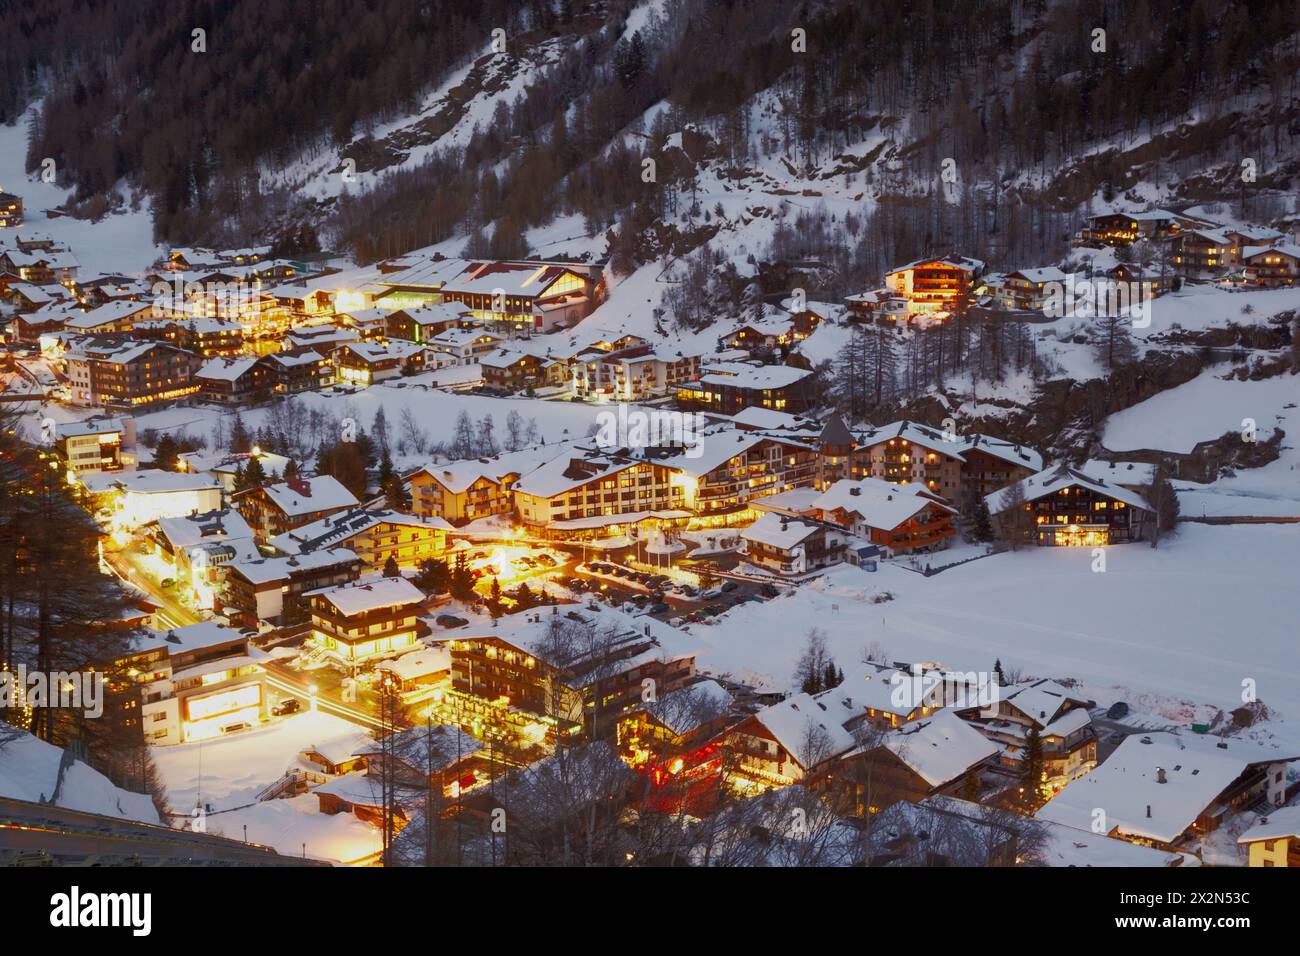 View from funicular station at village, filled with evening lights Stock Photo